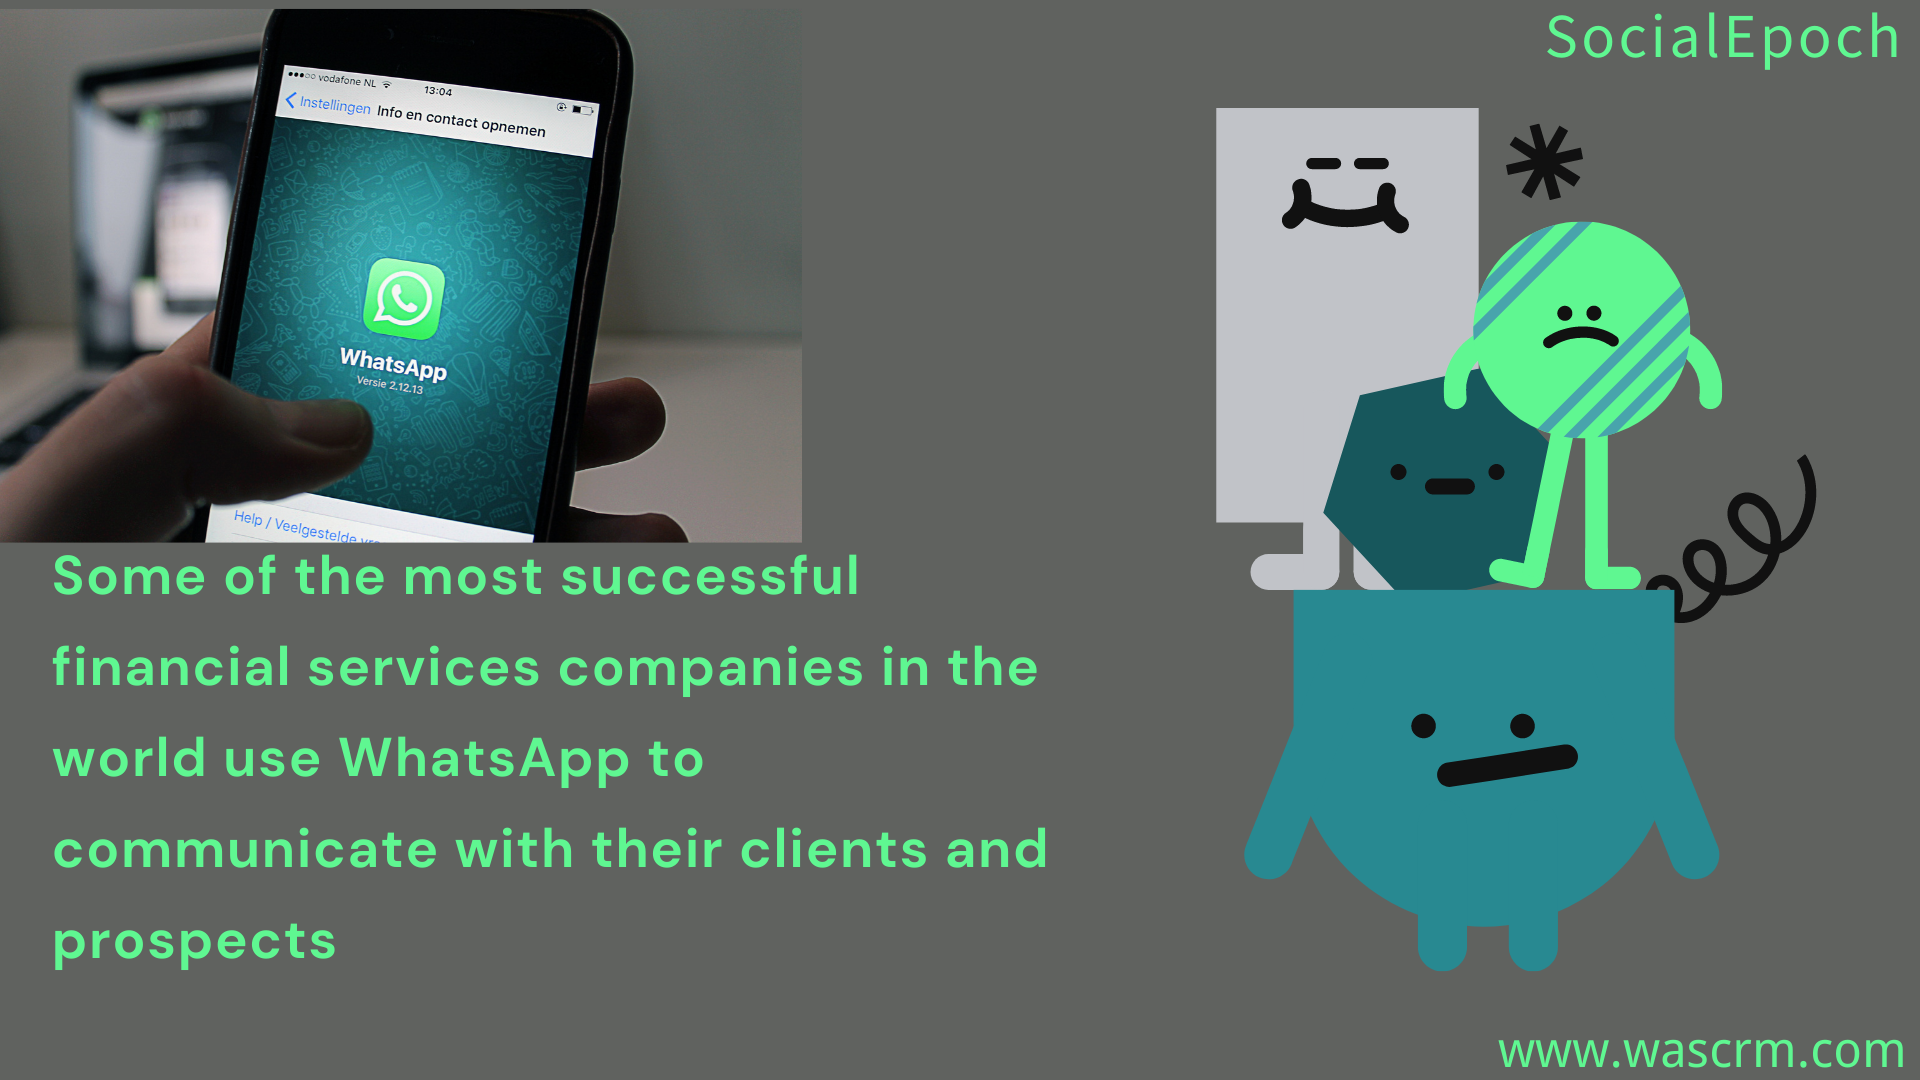 Some of the most successful financial services companies in the world use WhatsApp to communicate with their clients and prospects